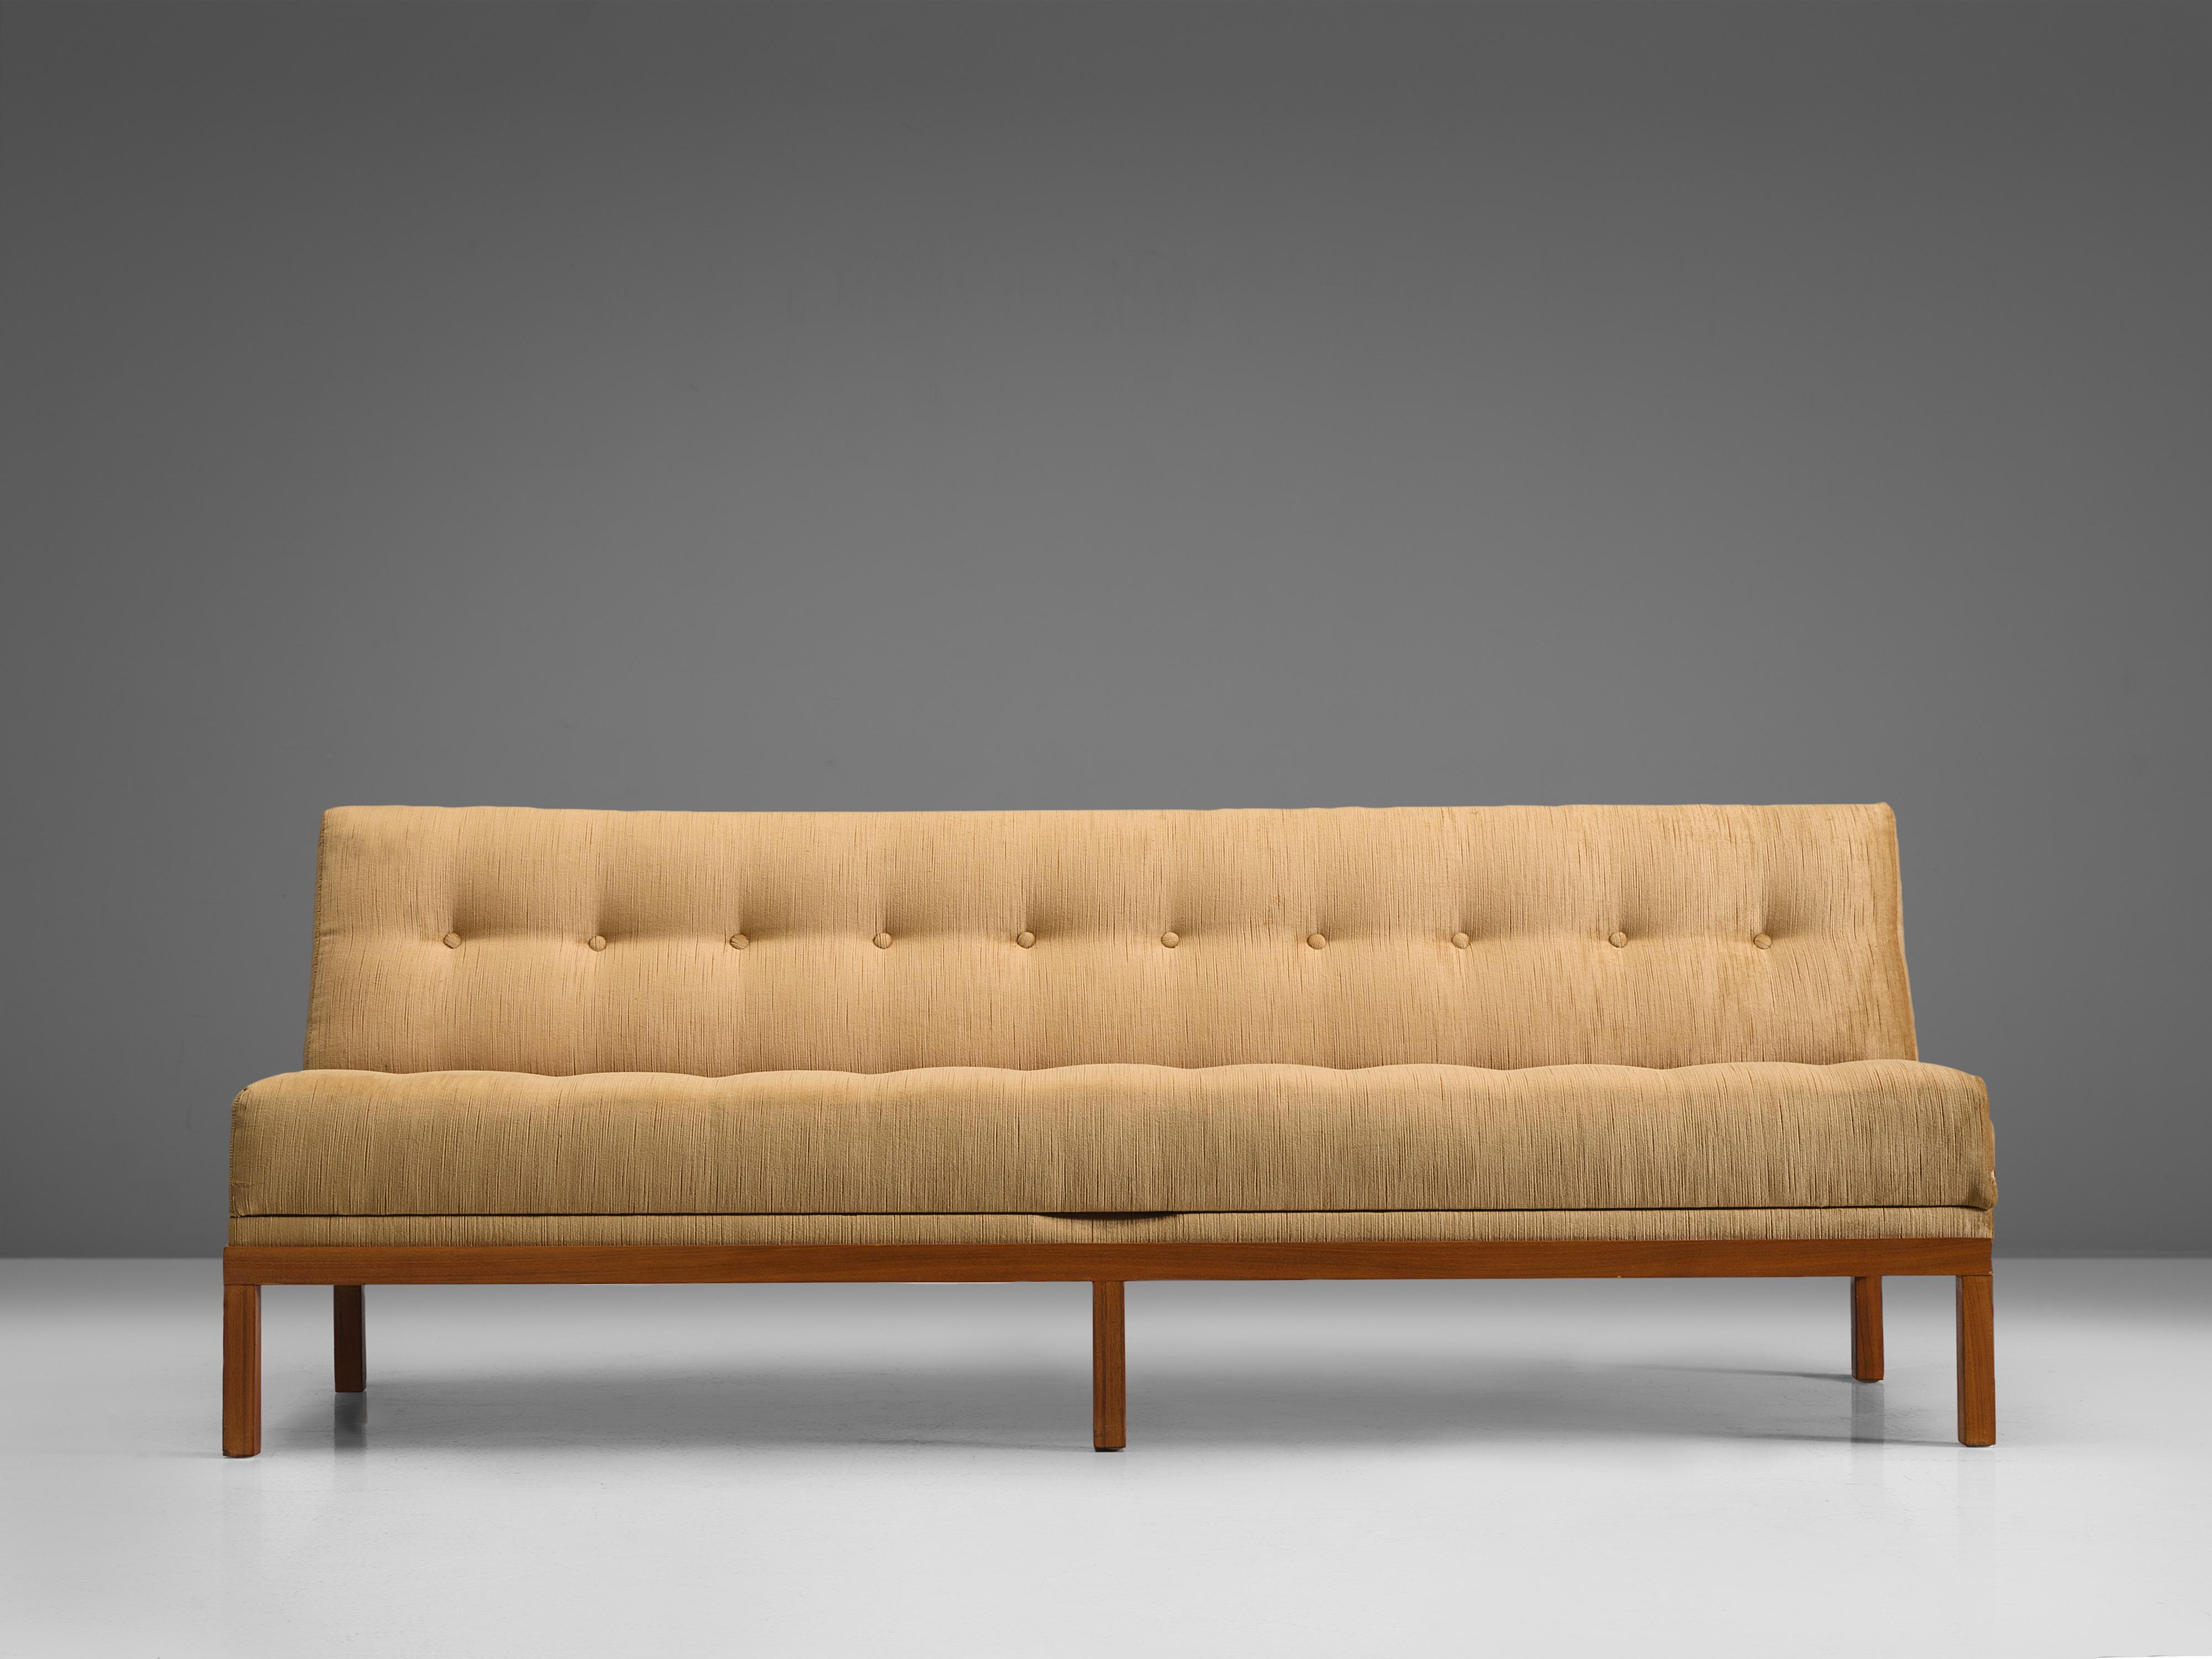 Johannes Spalt for Wittmann, fabric, teak, chrome-plated metal, Austria, 1960s. 

This Austrian daybed is named 'Constanze'. This item is designed by Johannes Spalt and manufactured by Wittmann. This early model, with teak frame and beige upholstery